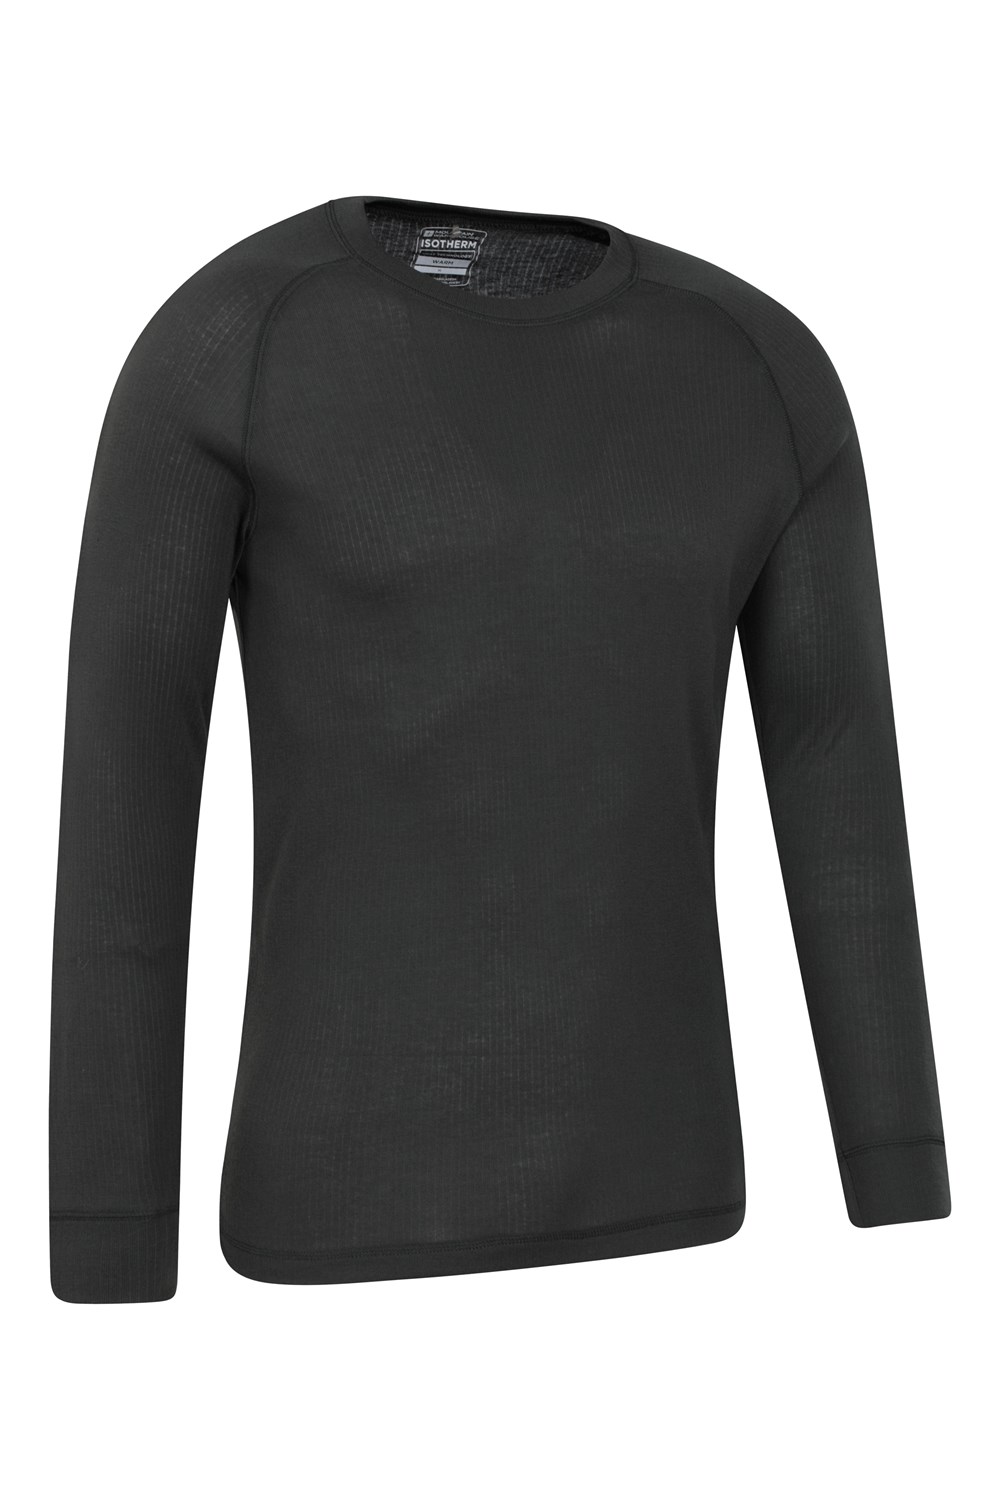 Mountain Warehouse Mens Long Sleeved Round Neck Top Thermal Baselayer ...